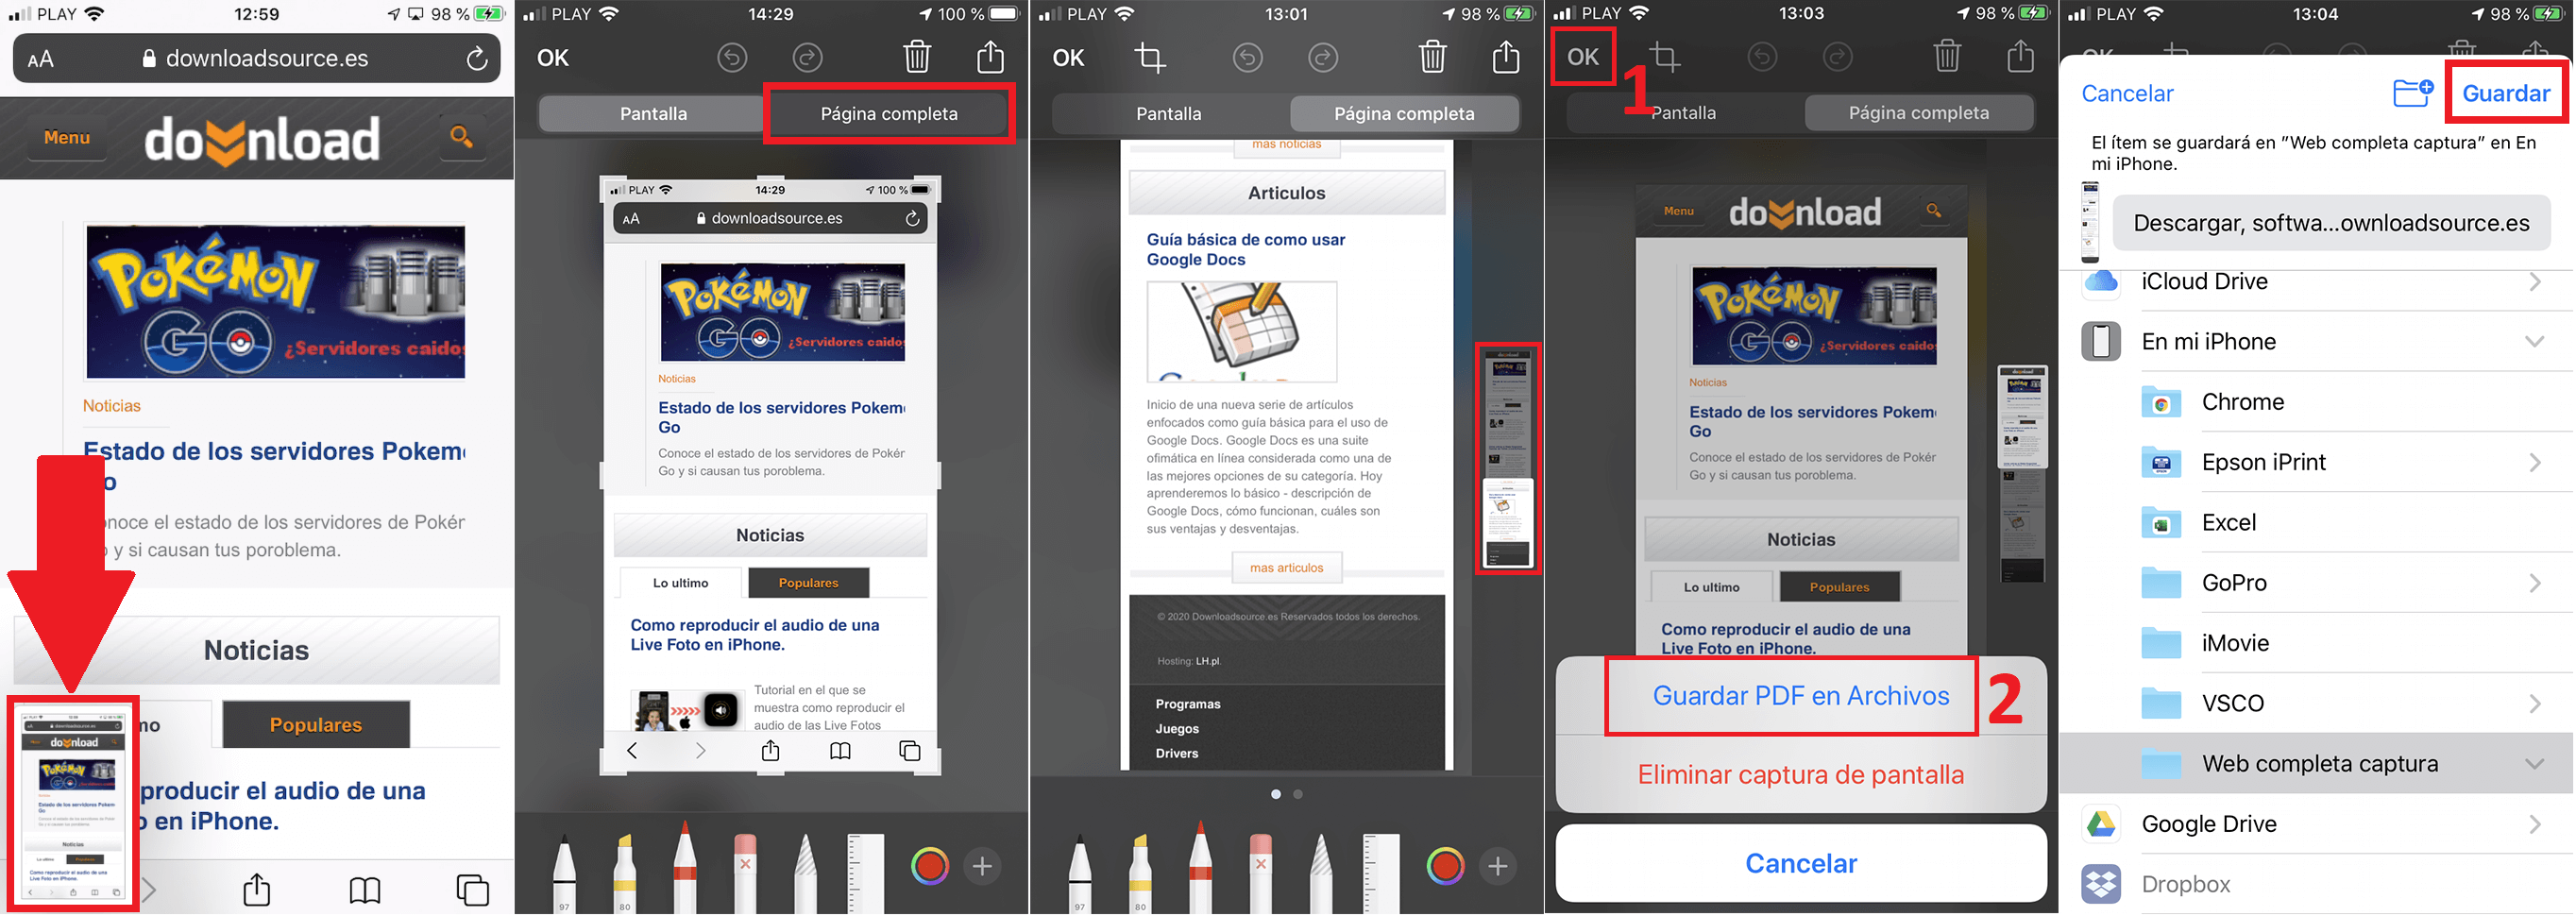 how to capture an entire web on iPhone with iOS